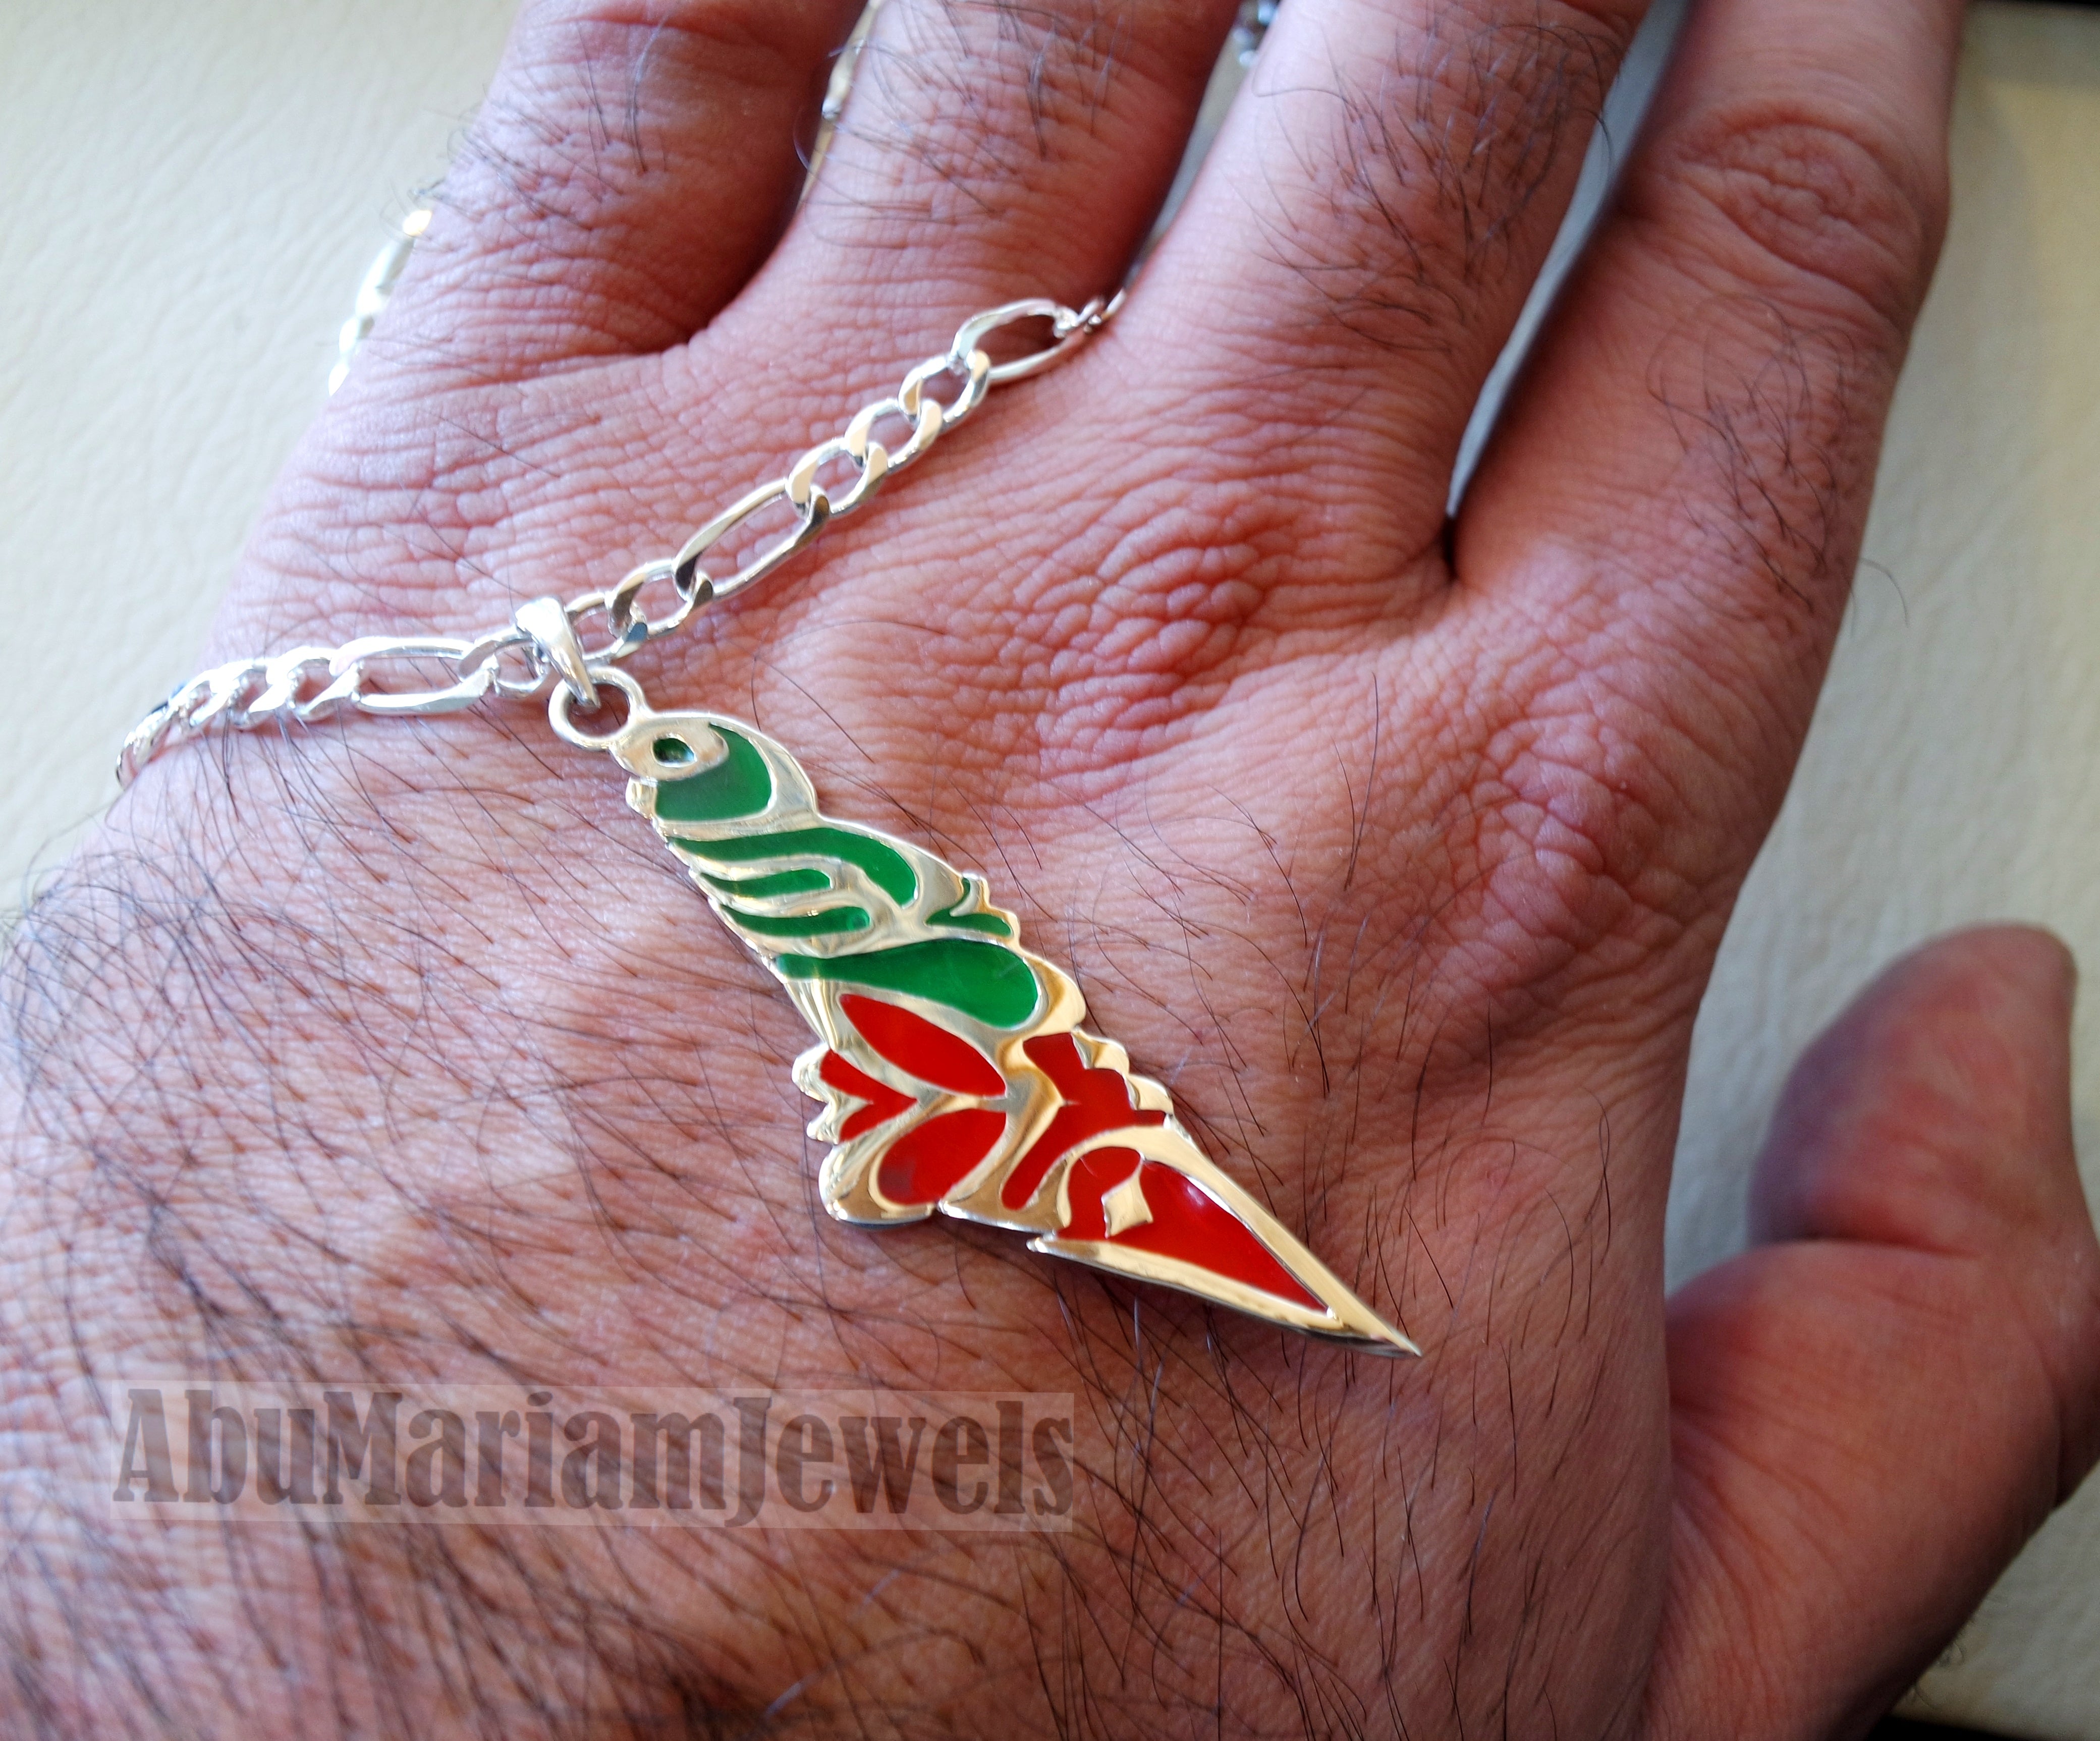 Palestine necklace map pendant with thick chain sterling silver 925 colorful enamel jewelry arabic calligraphy fast shipping خارطه فلسطين